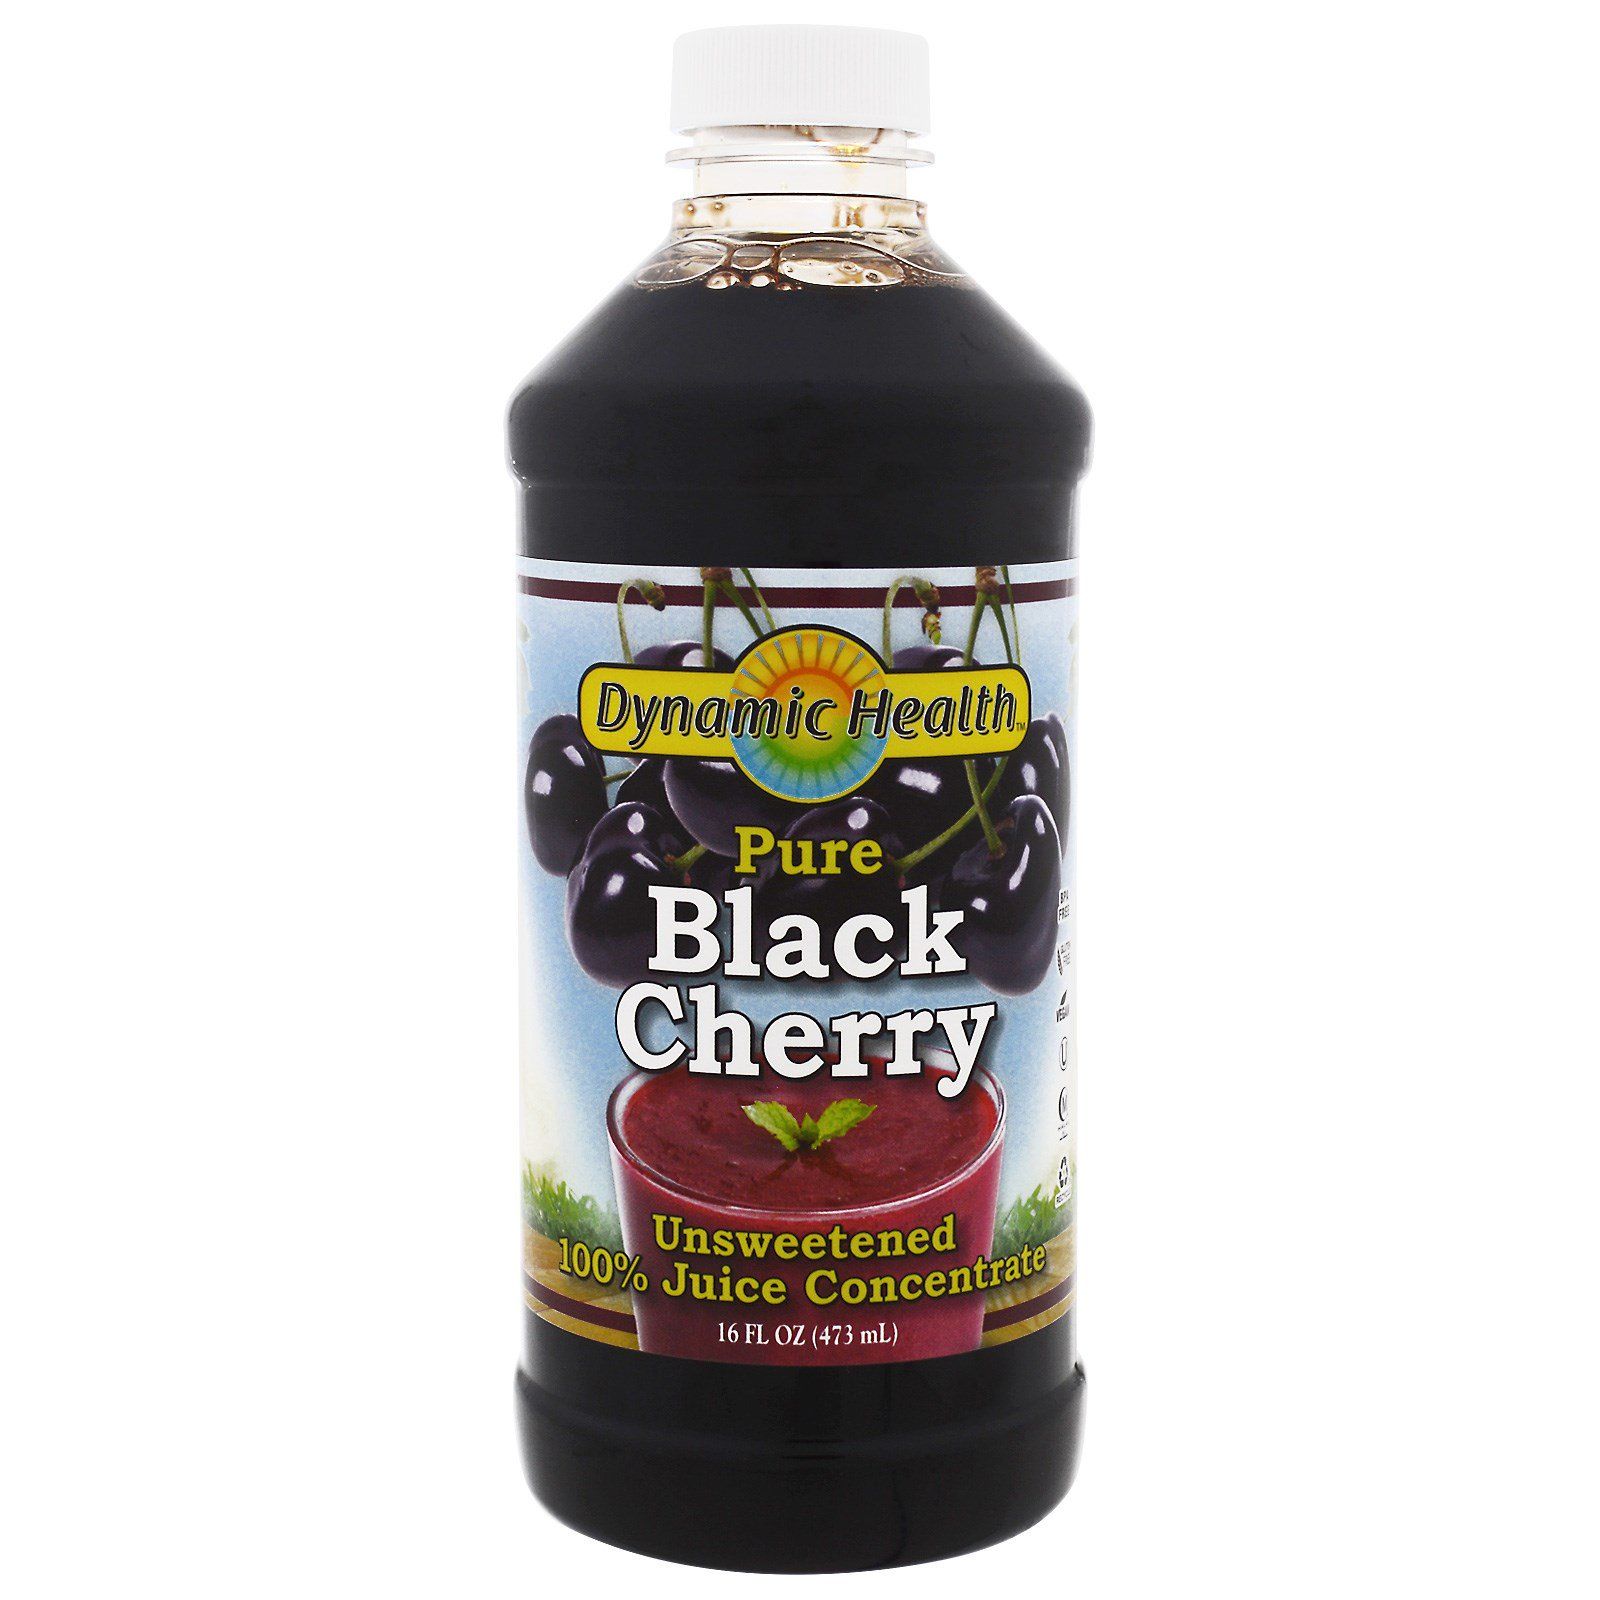 Dynamic Health Laboratories Pure Black Cherry 100% Juice Concentrate Unsweetened 16 fl oz (473 ml)